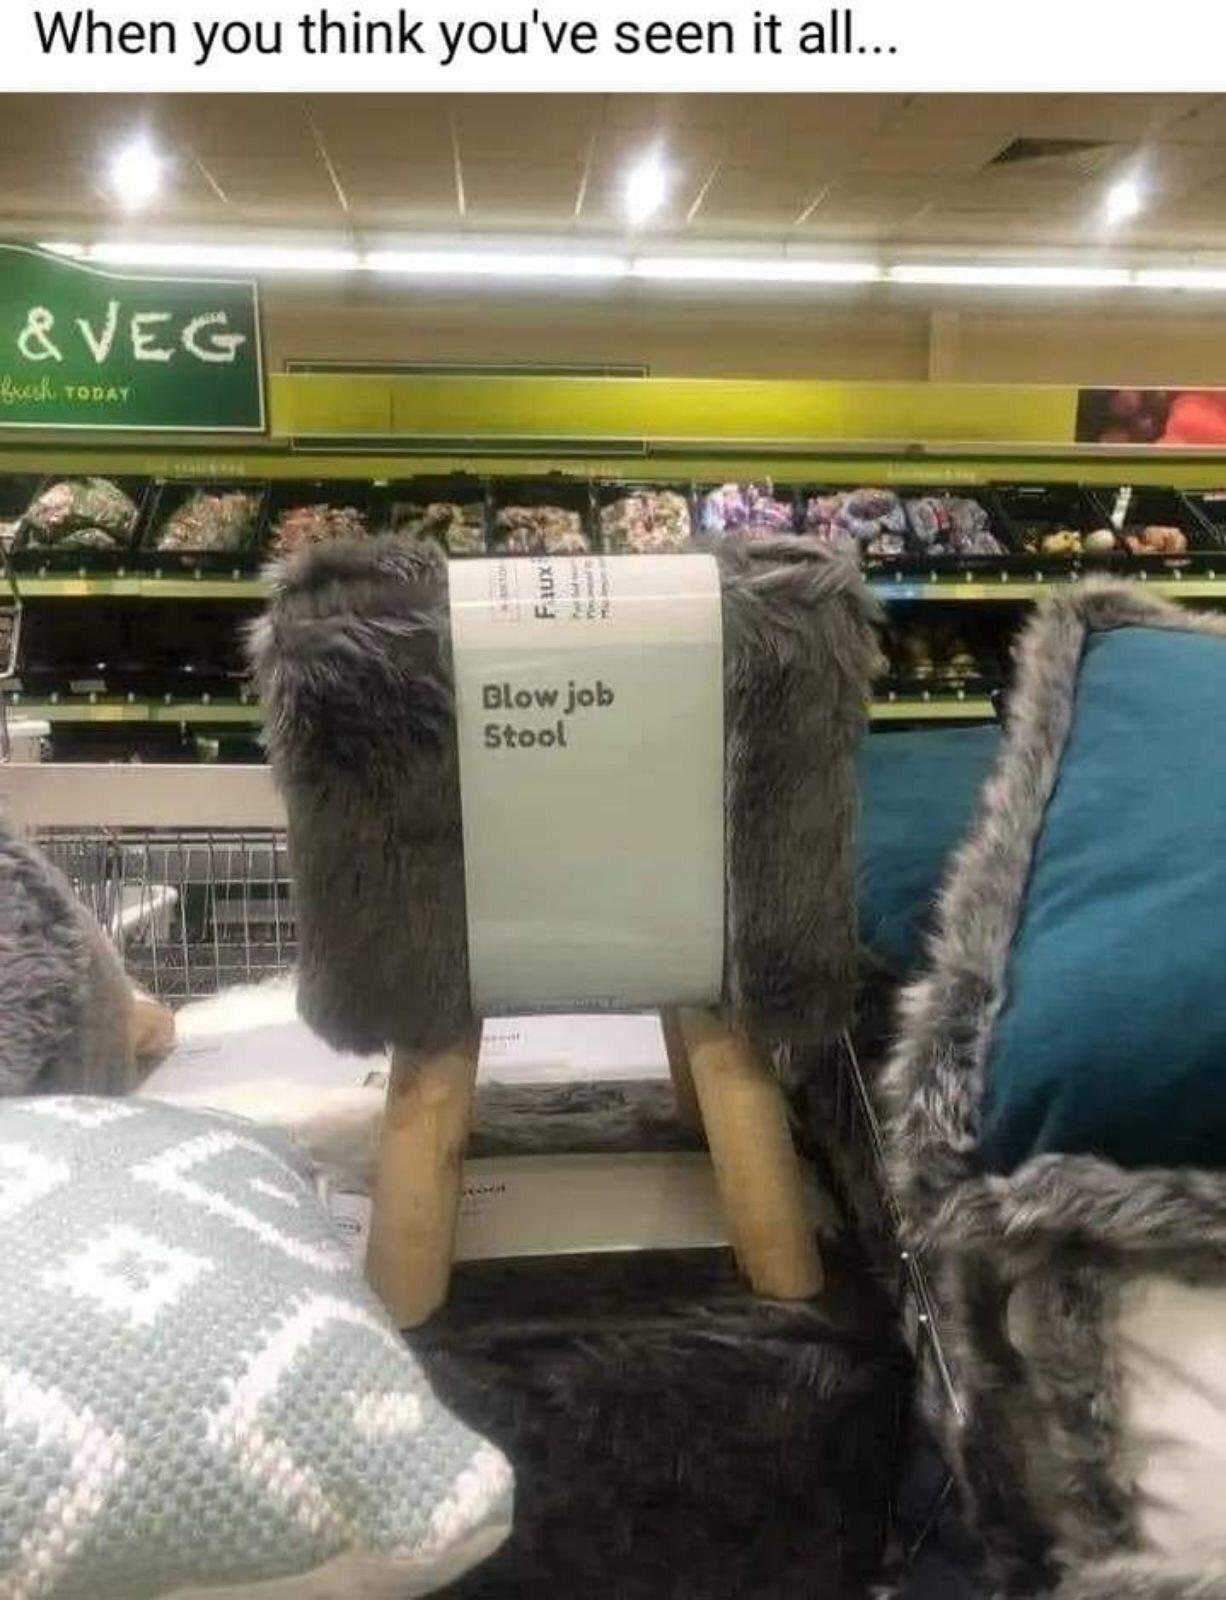 Fresh Pics And Memes - fur - When you think you've seen it all...